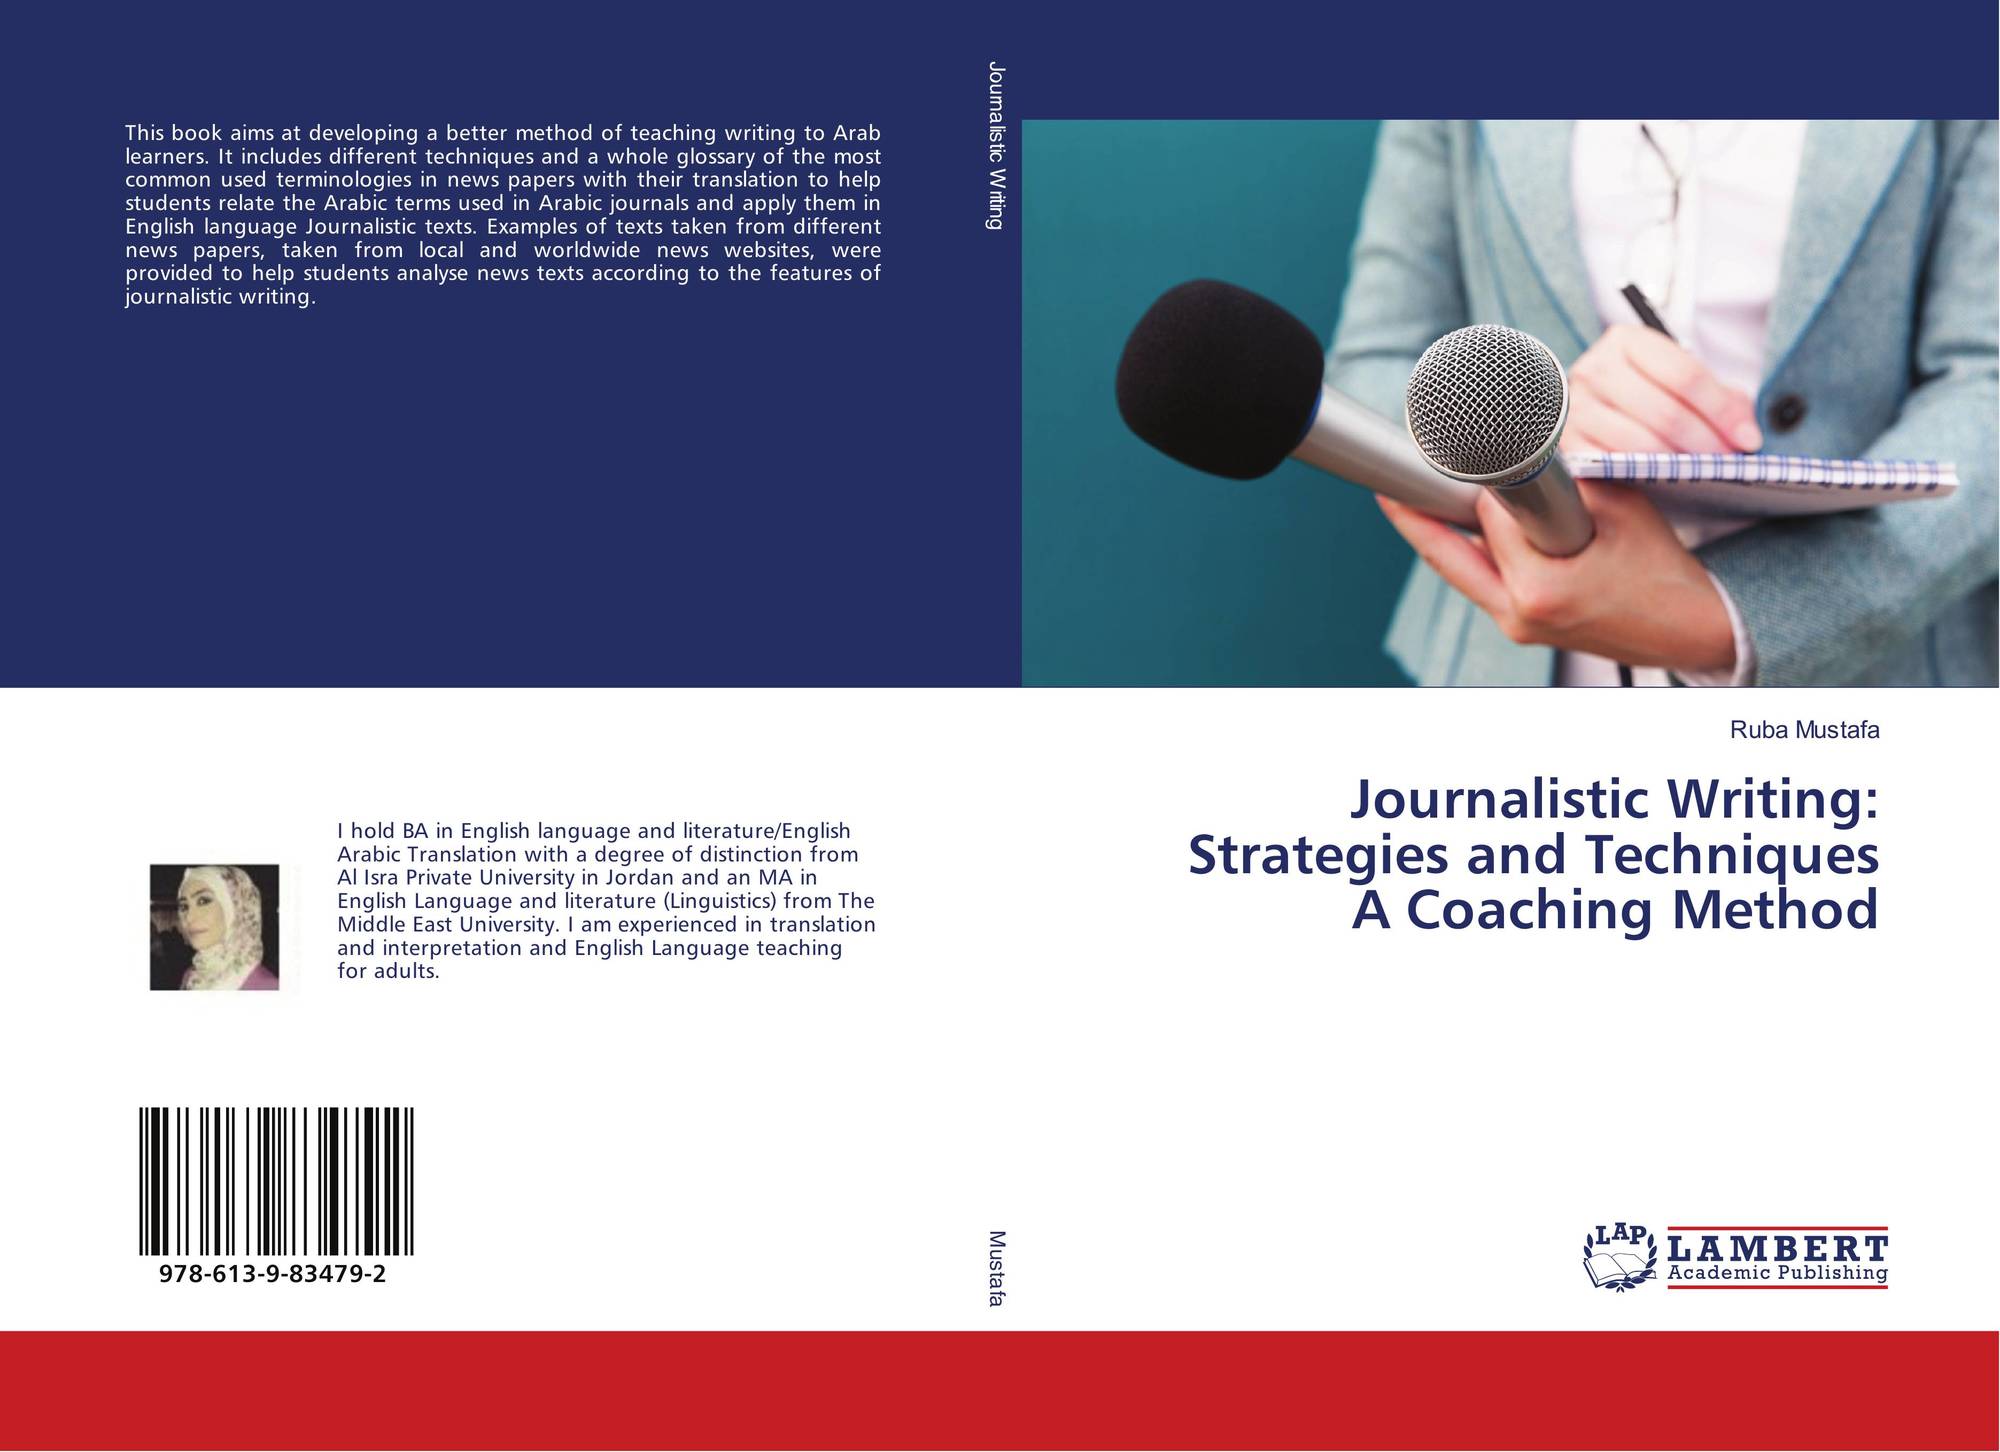 Journalistic Writing: Strategies and Techniques A Coaching Method